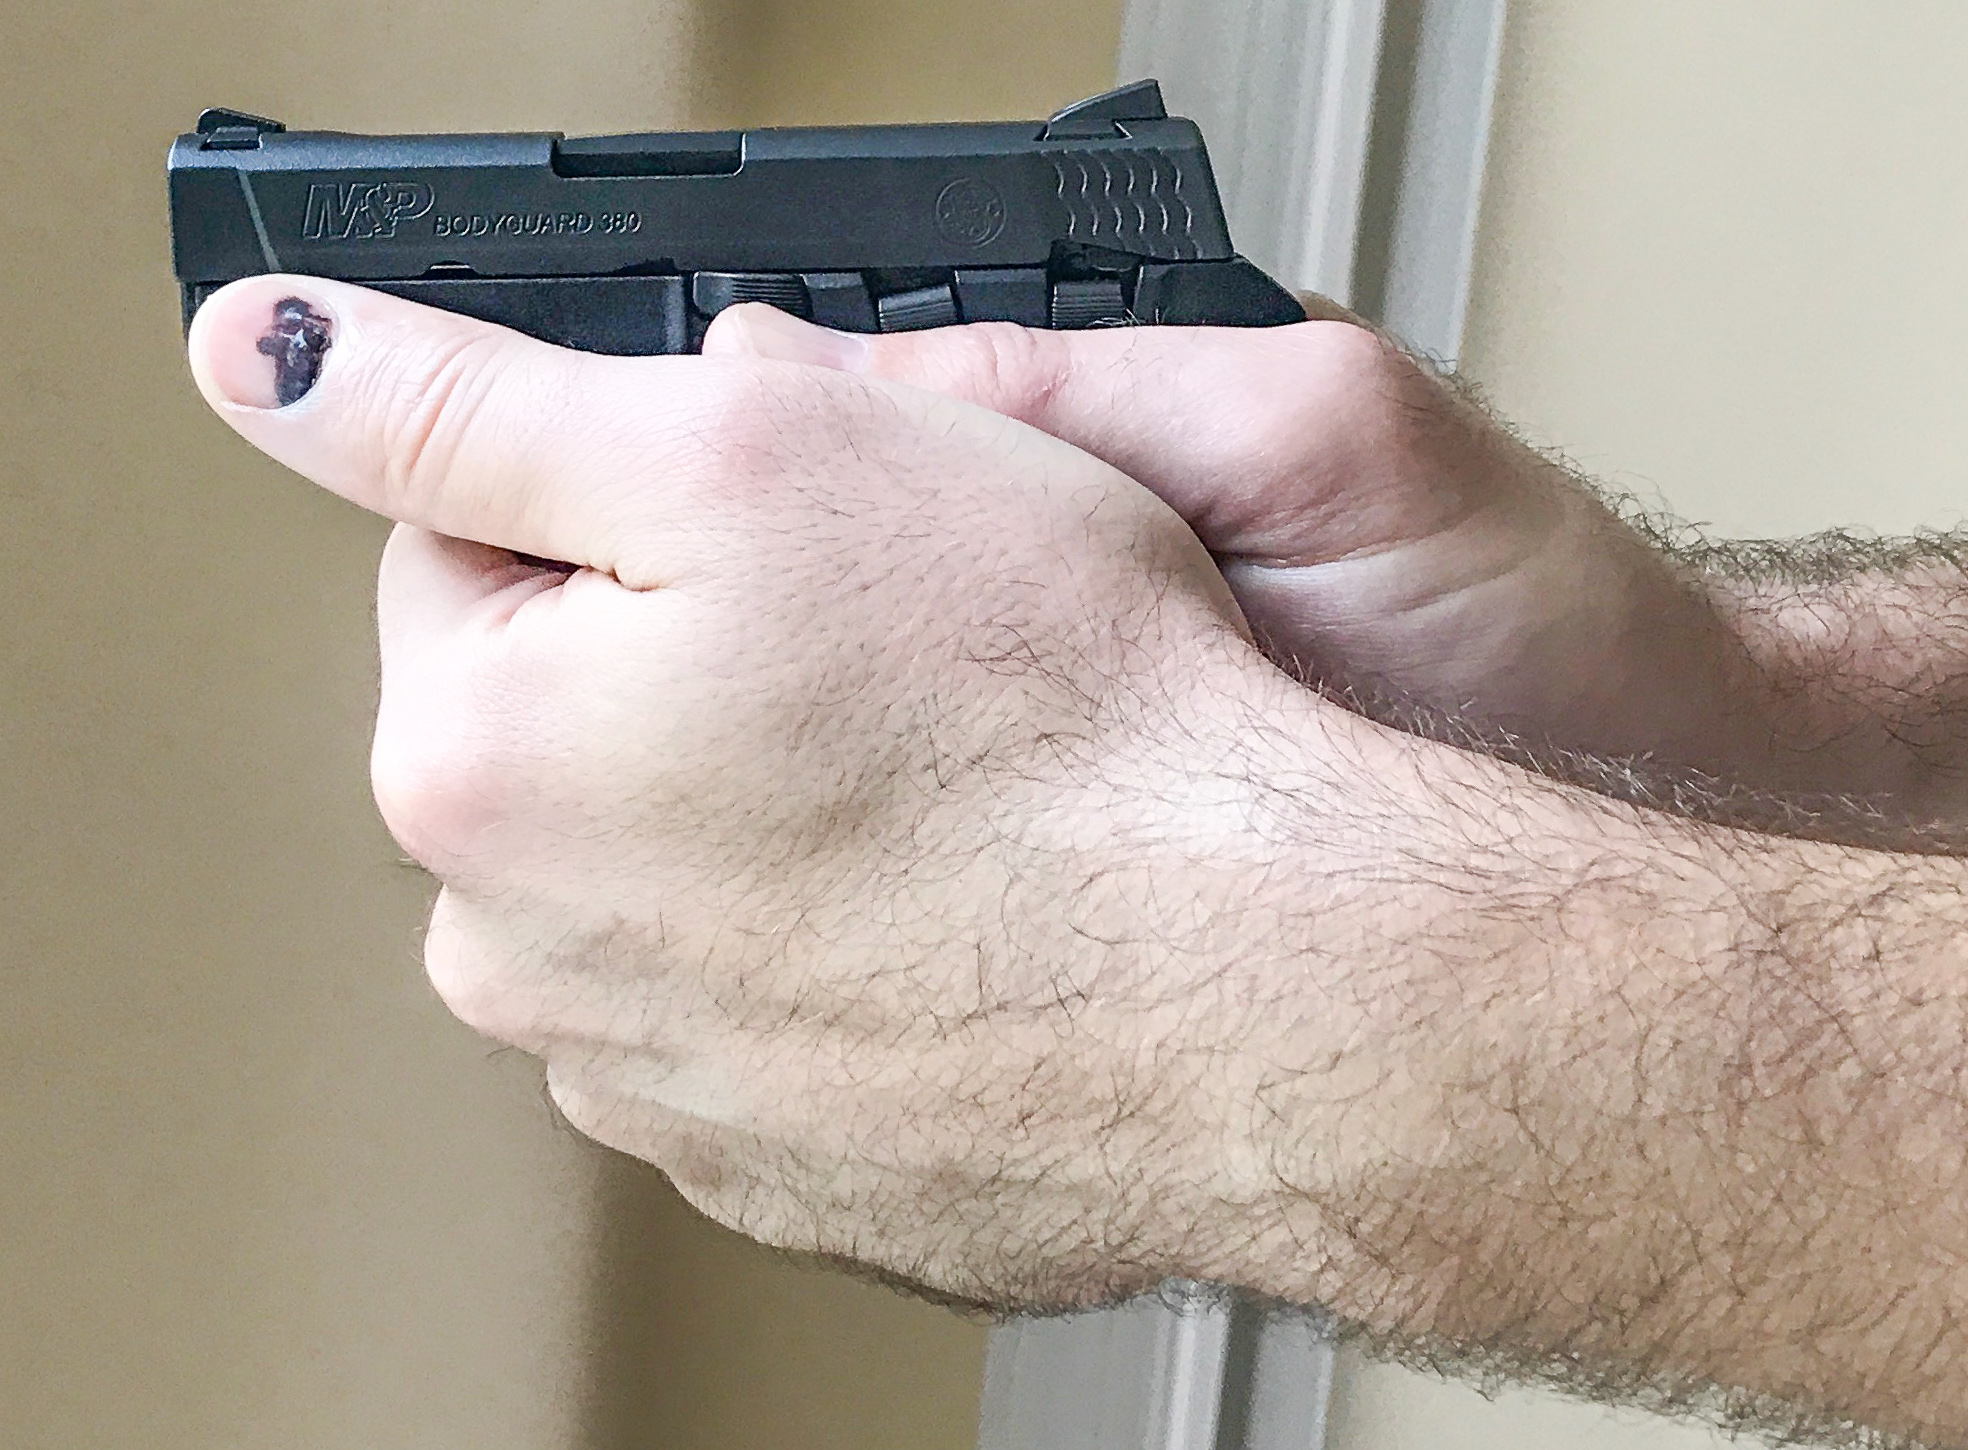 Support side view of two-handed grip on small pistol by large right-handed shooter